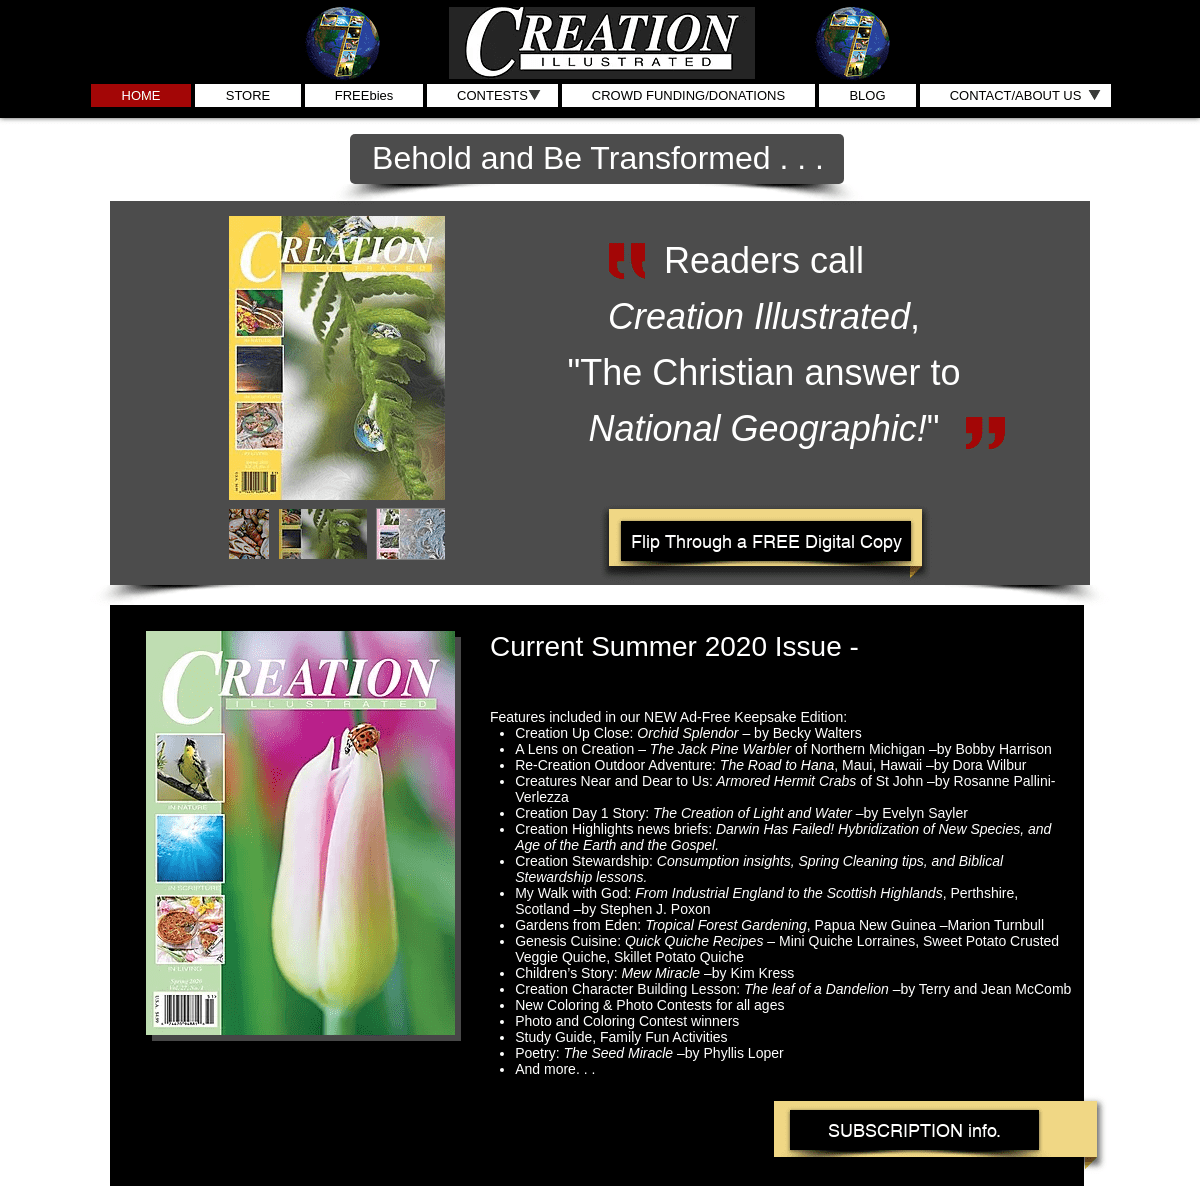 A complete backup of creationillustrated.com